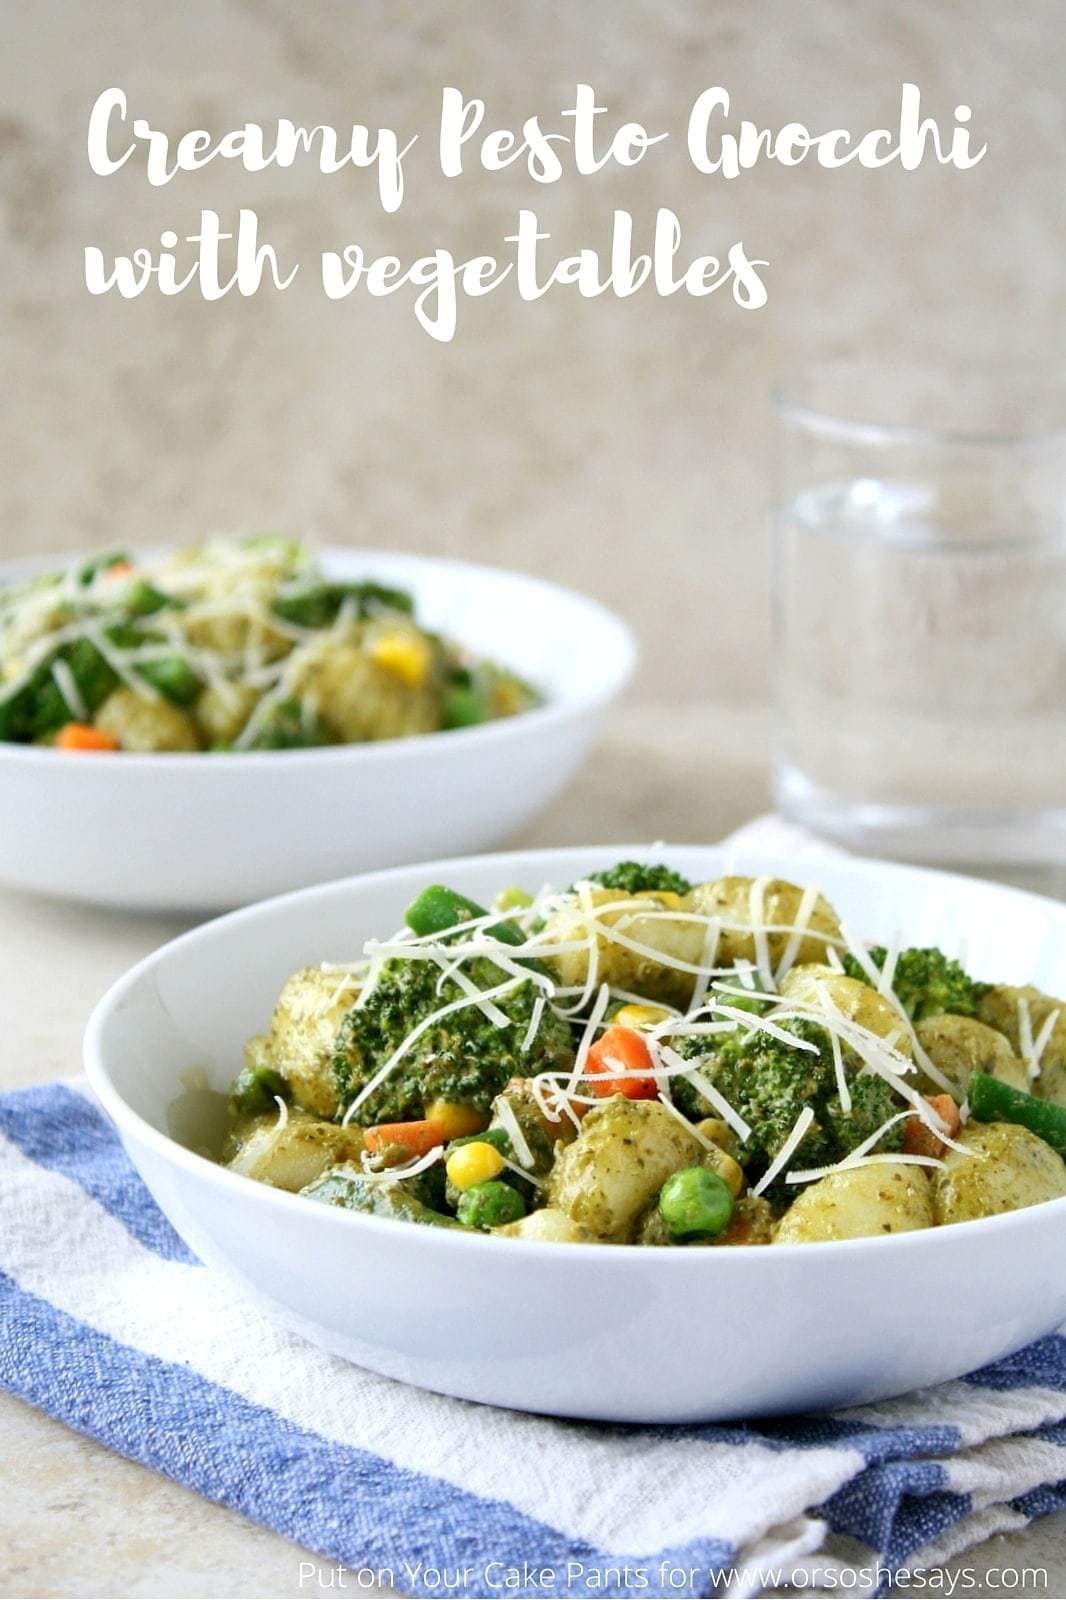 Creamy Pesto Gnocchi Recipe - A flavorful, springy dish that's perfect for this warmer weather!